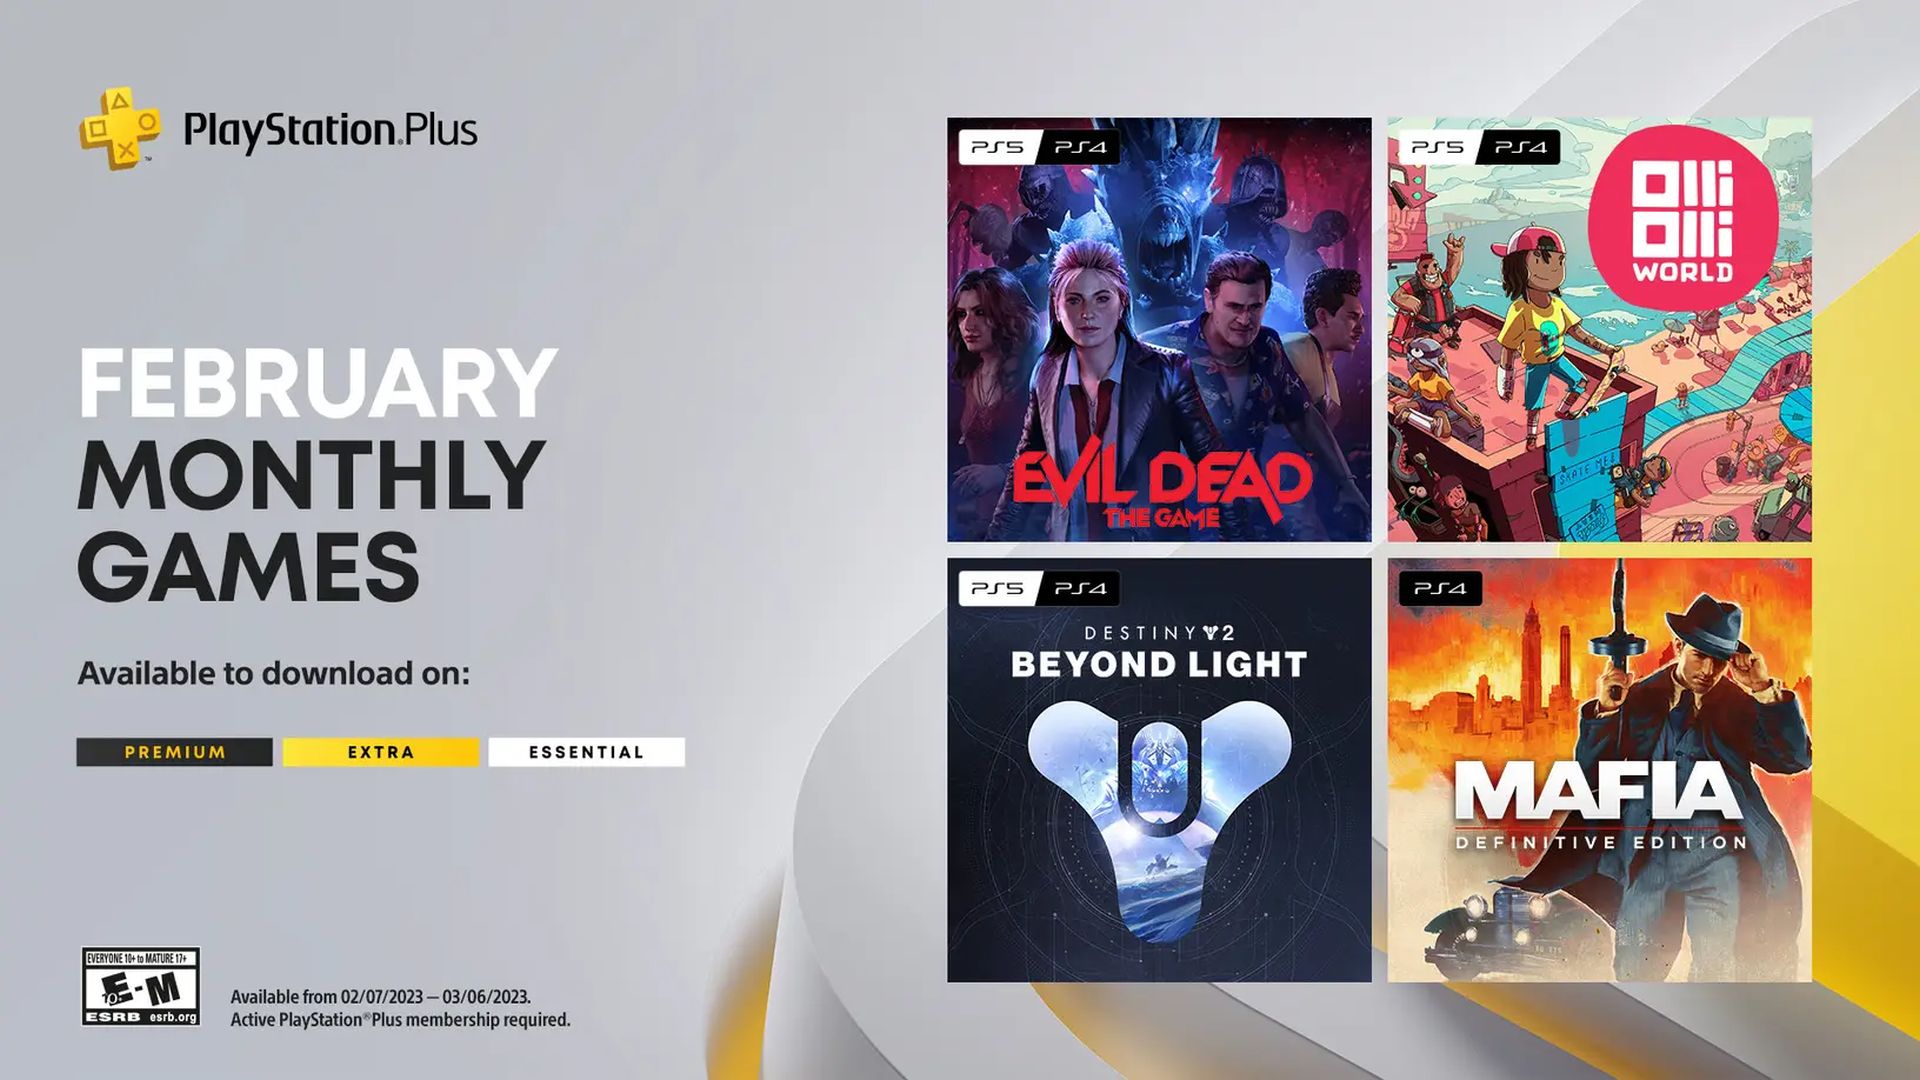 Getting started with PS Plus  All you need to know about